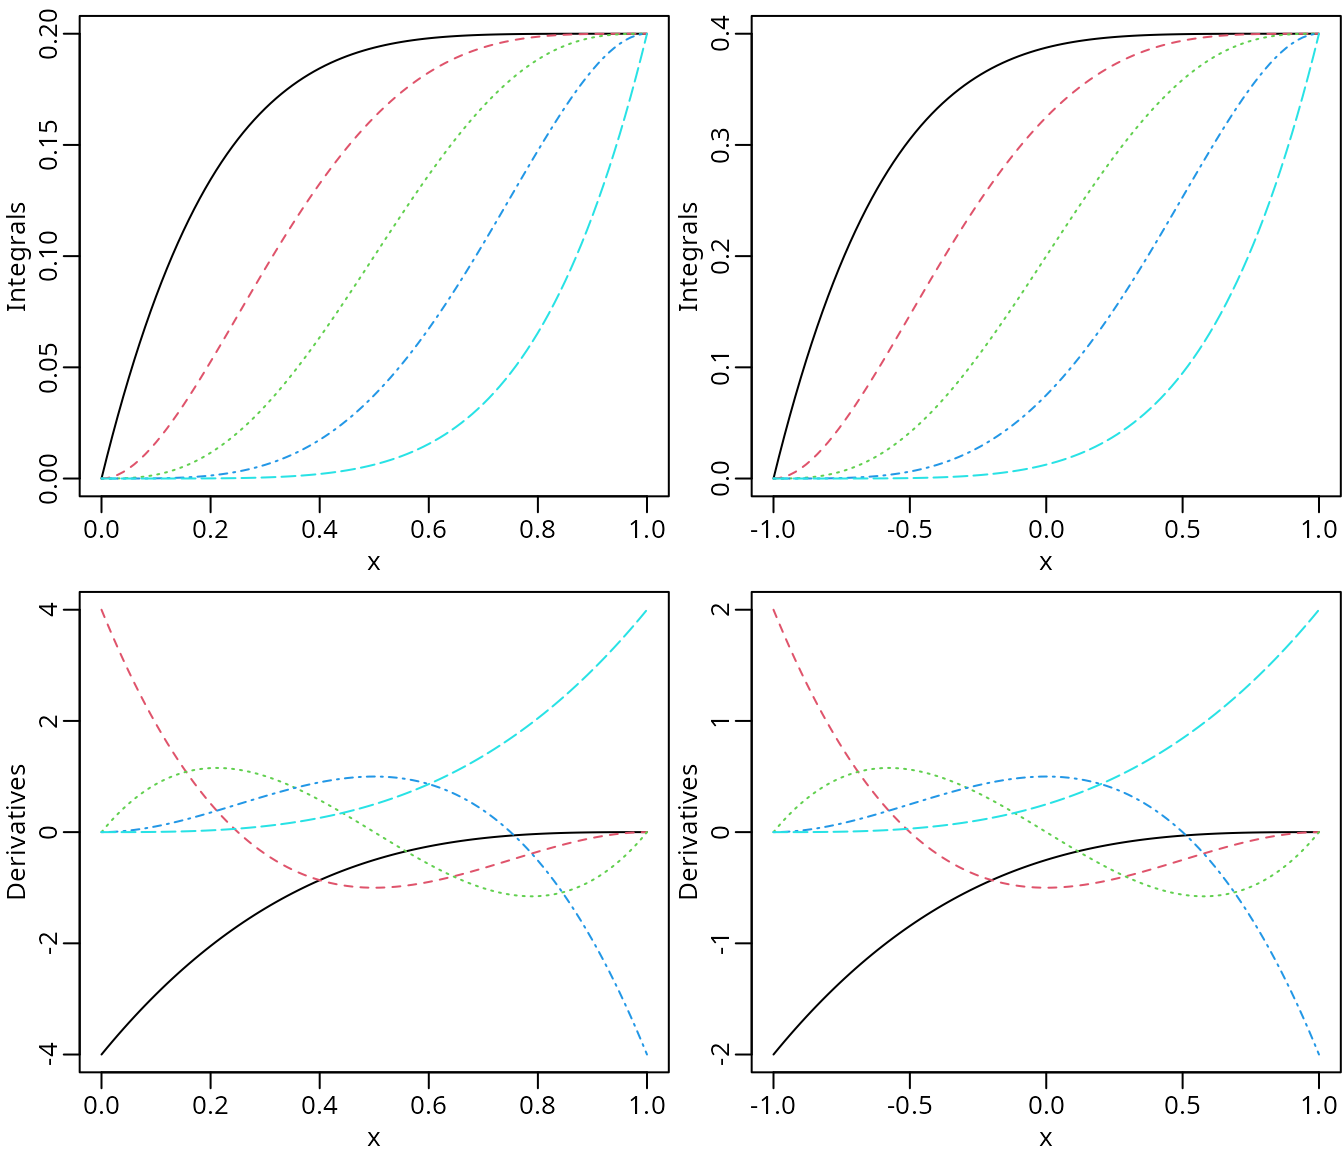 The integrals (upper panel) and the first derivatives (lower panel) of Bernstein polynomials of degree 4.